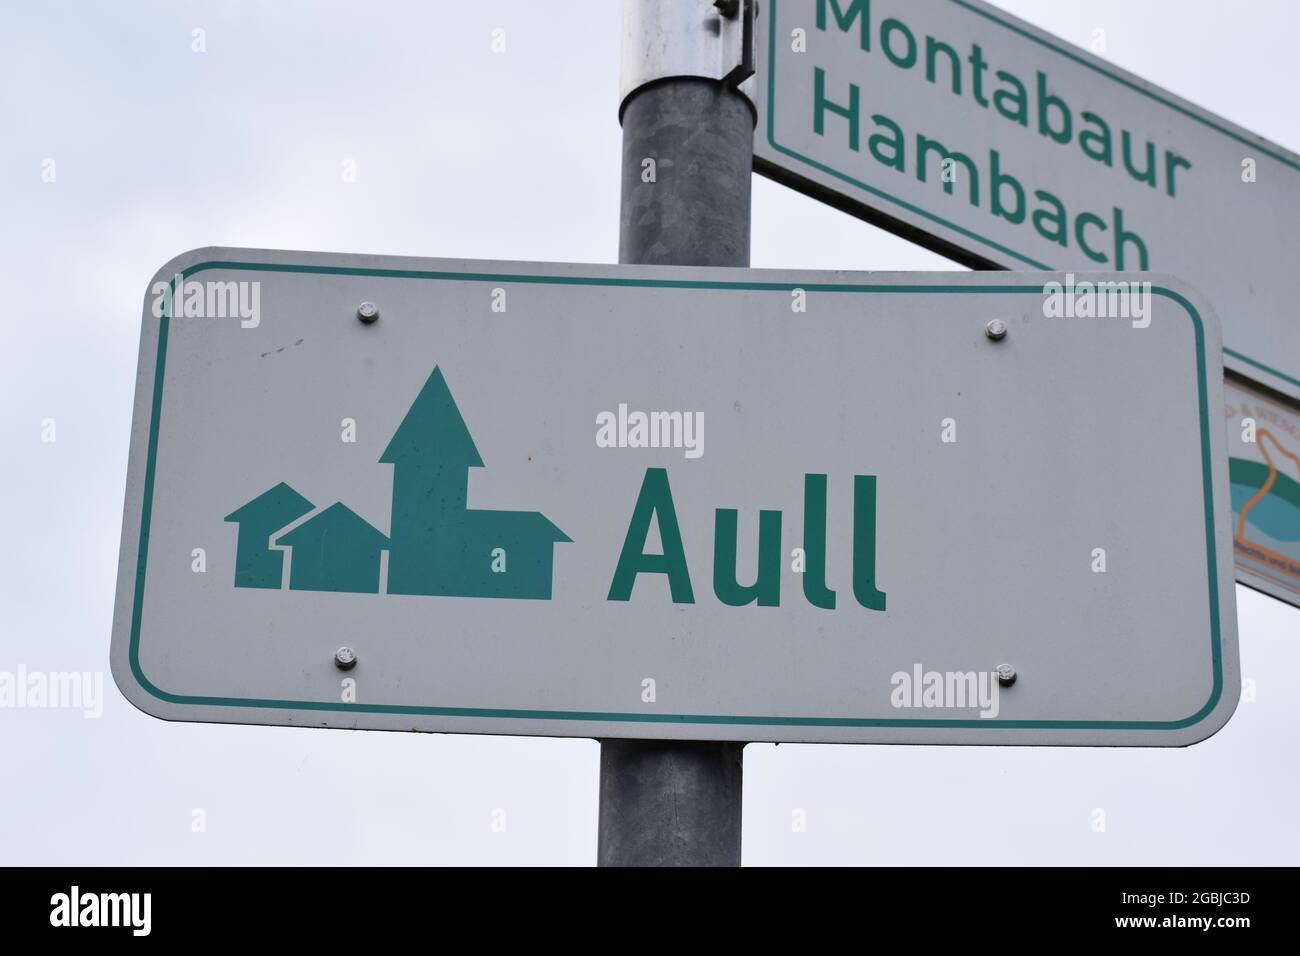 Aull High Resolution Stock Photography and Images - Alamy